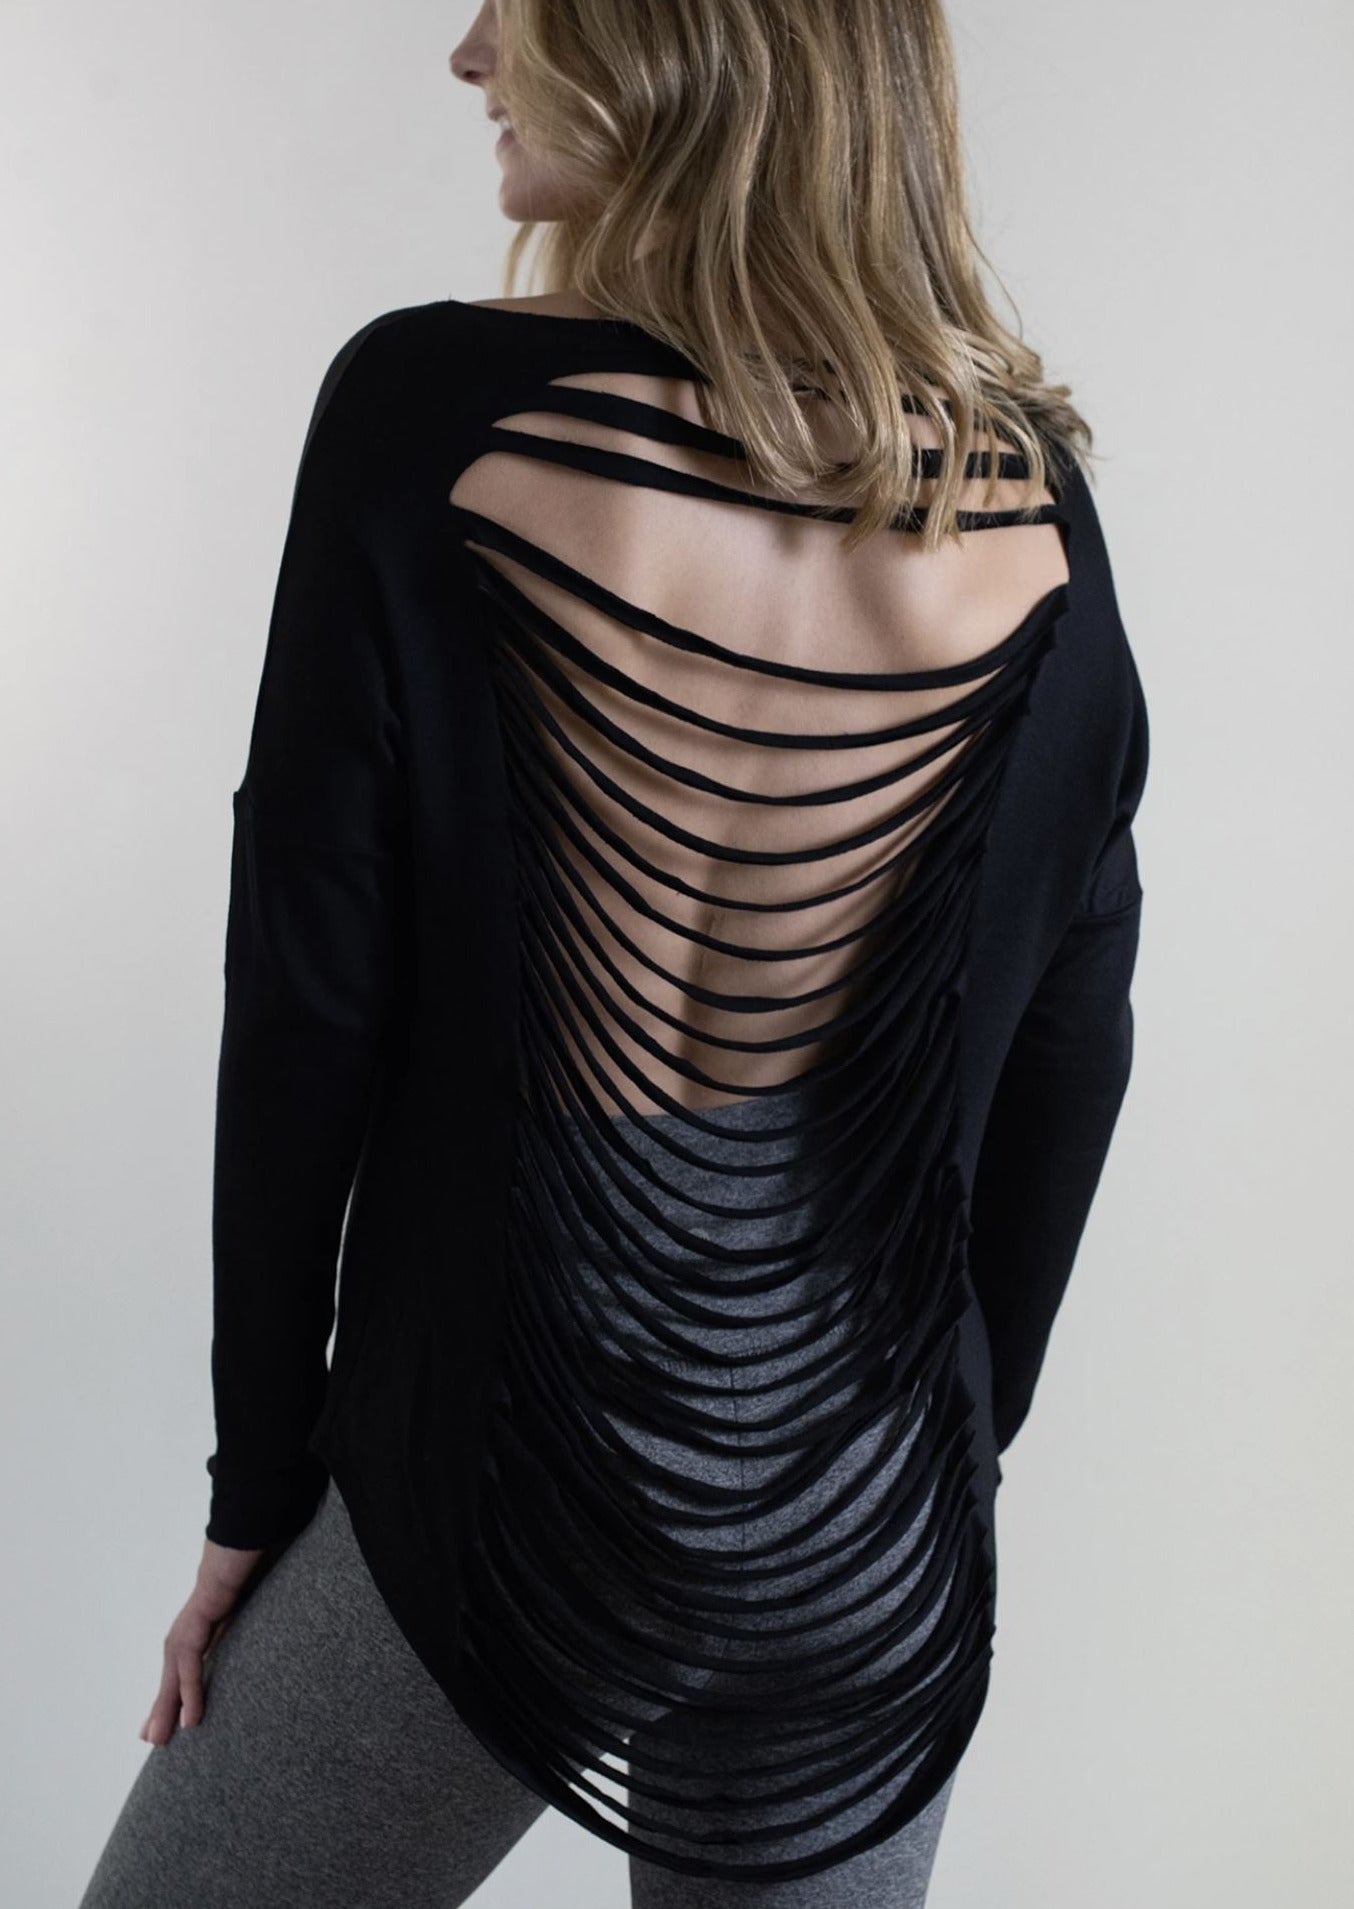 Made in USA | JALA Black Sari Top with Cut Out Back | Made in USA | Classy Cozy Cool Women's Clothing Boutique